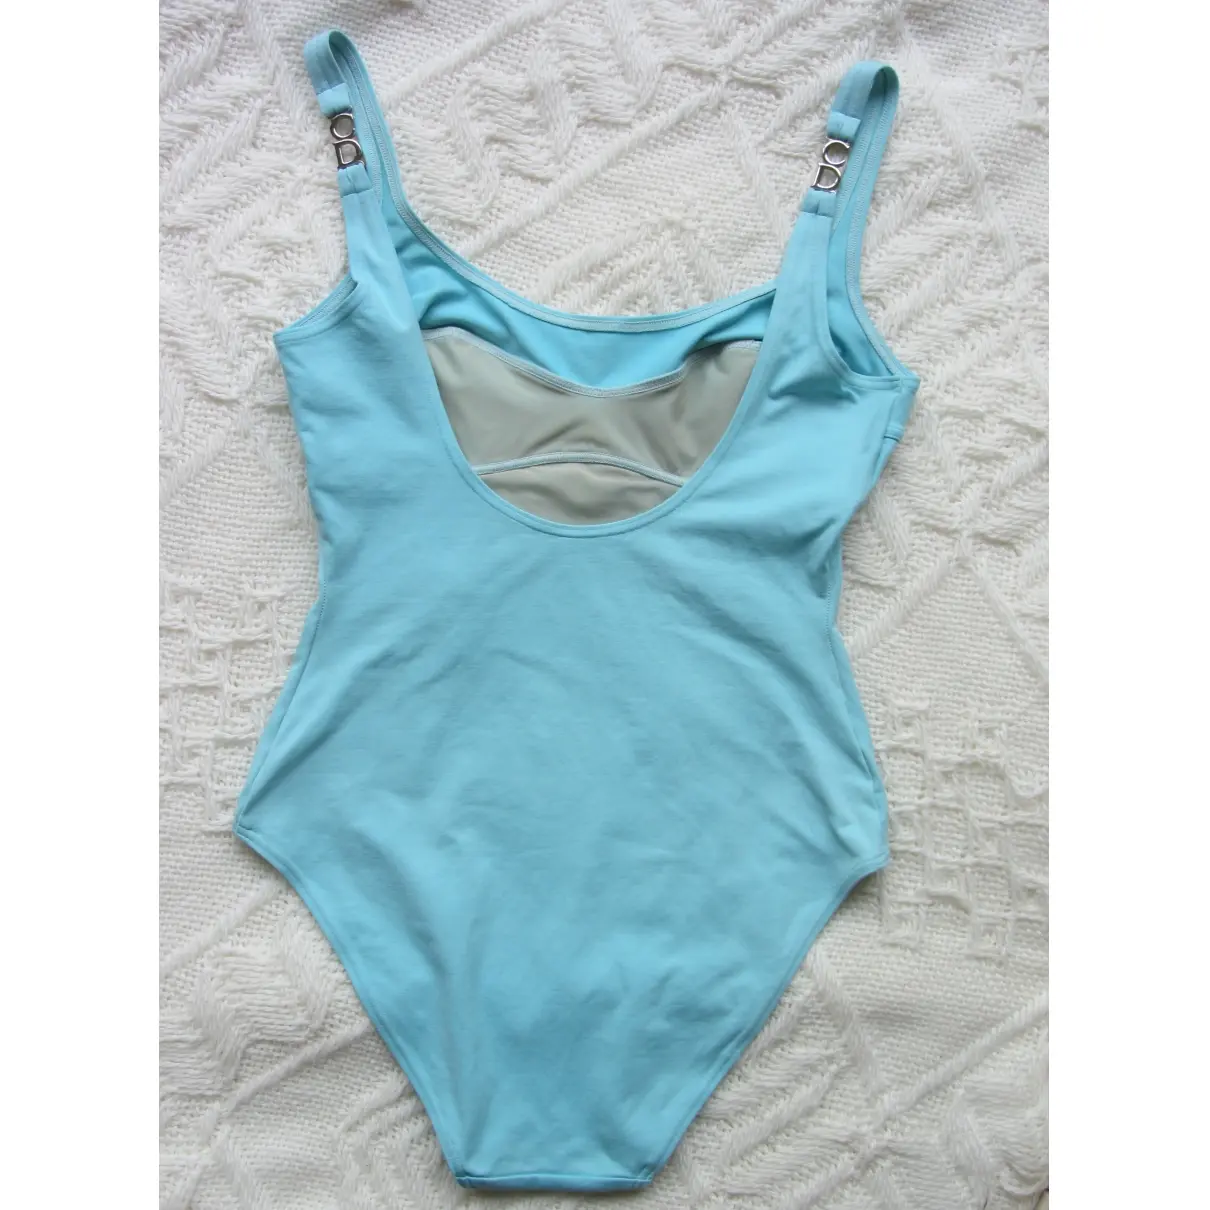 Dior One-piece swimsuit for sale - Vintage